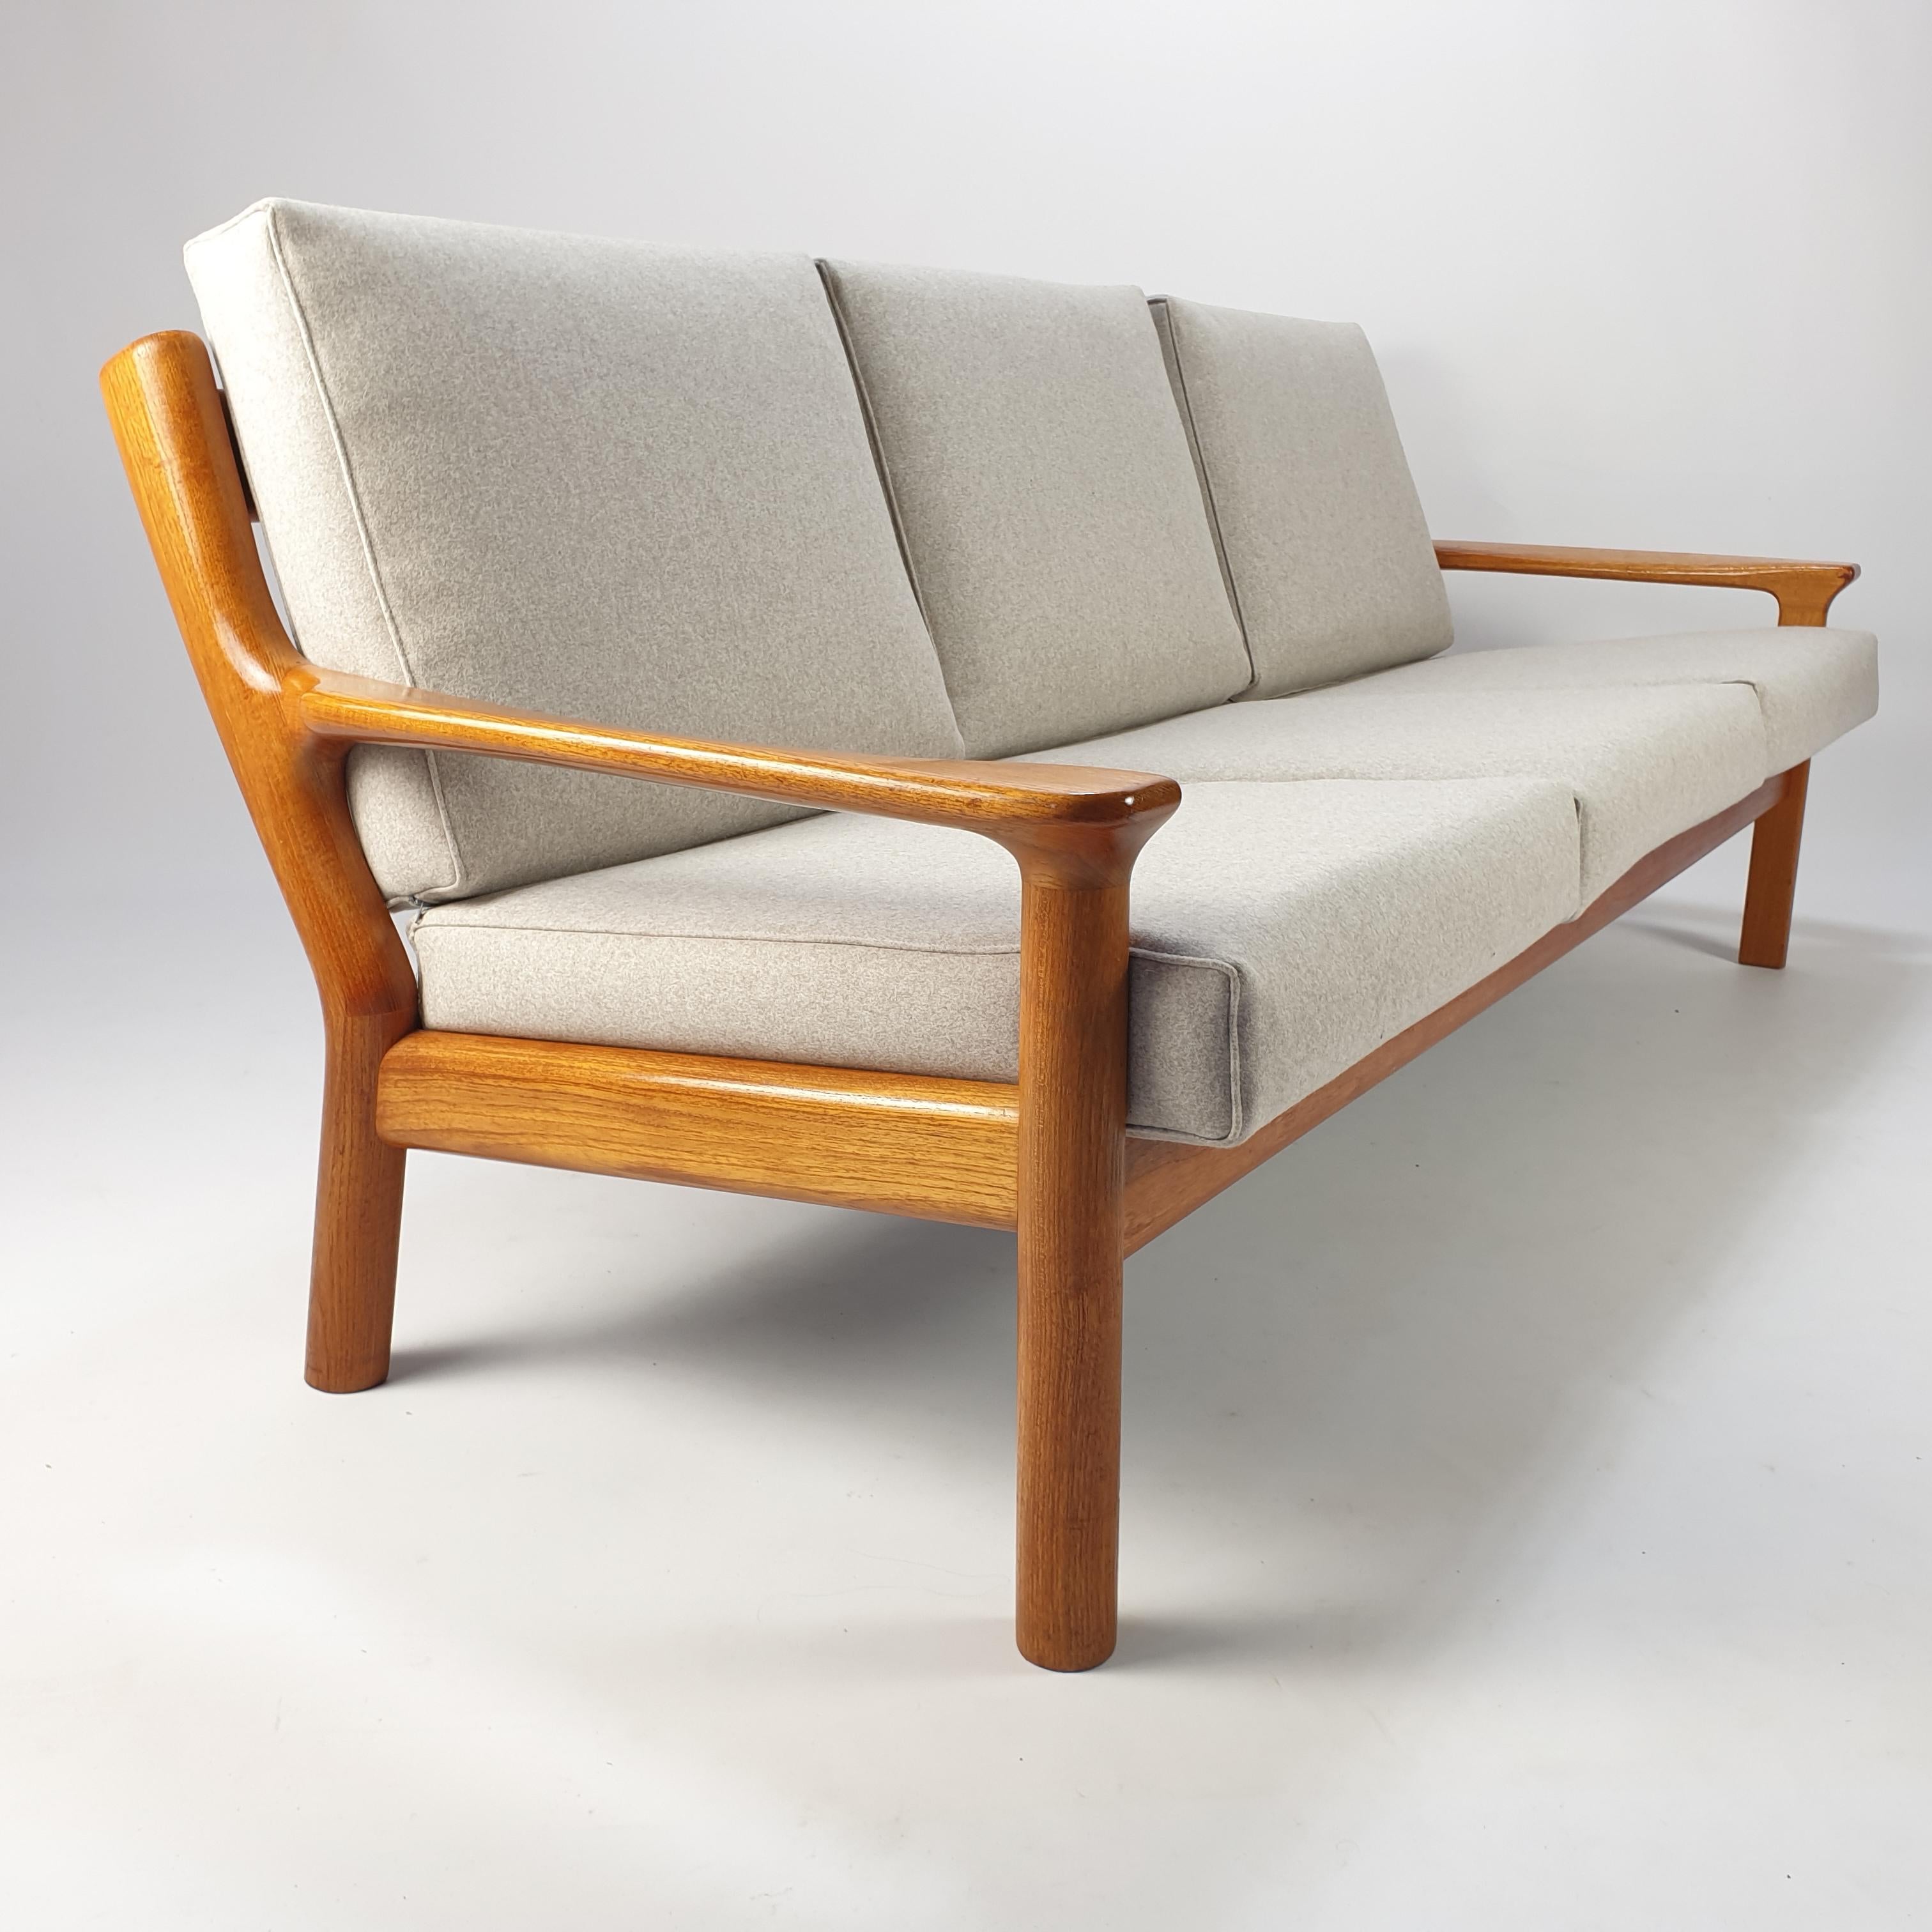 Fabric Mid Century Teak 3-Seater Sofa by Juul Kristensen for Glostrup, 1970s For Sale